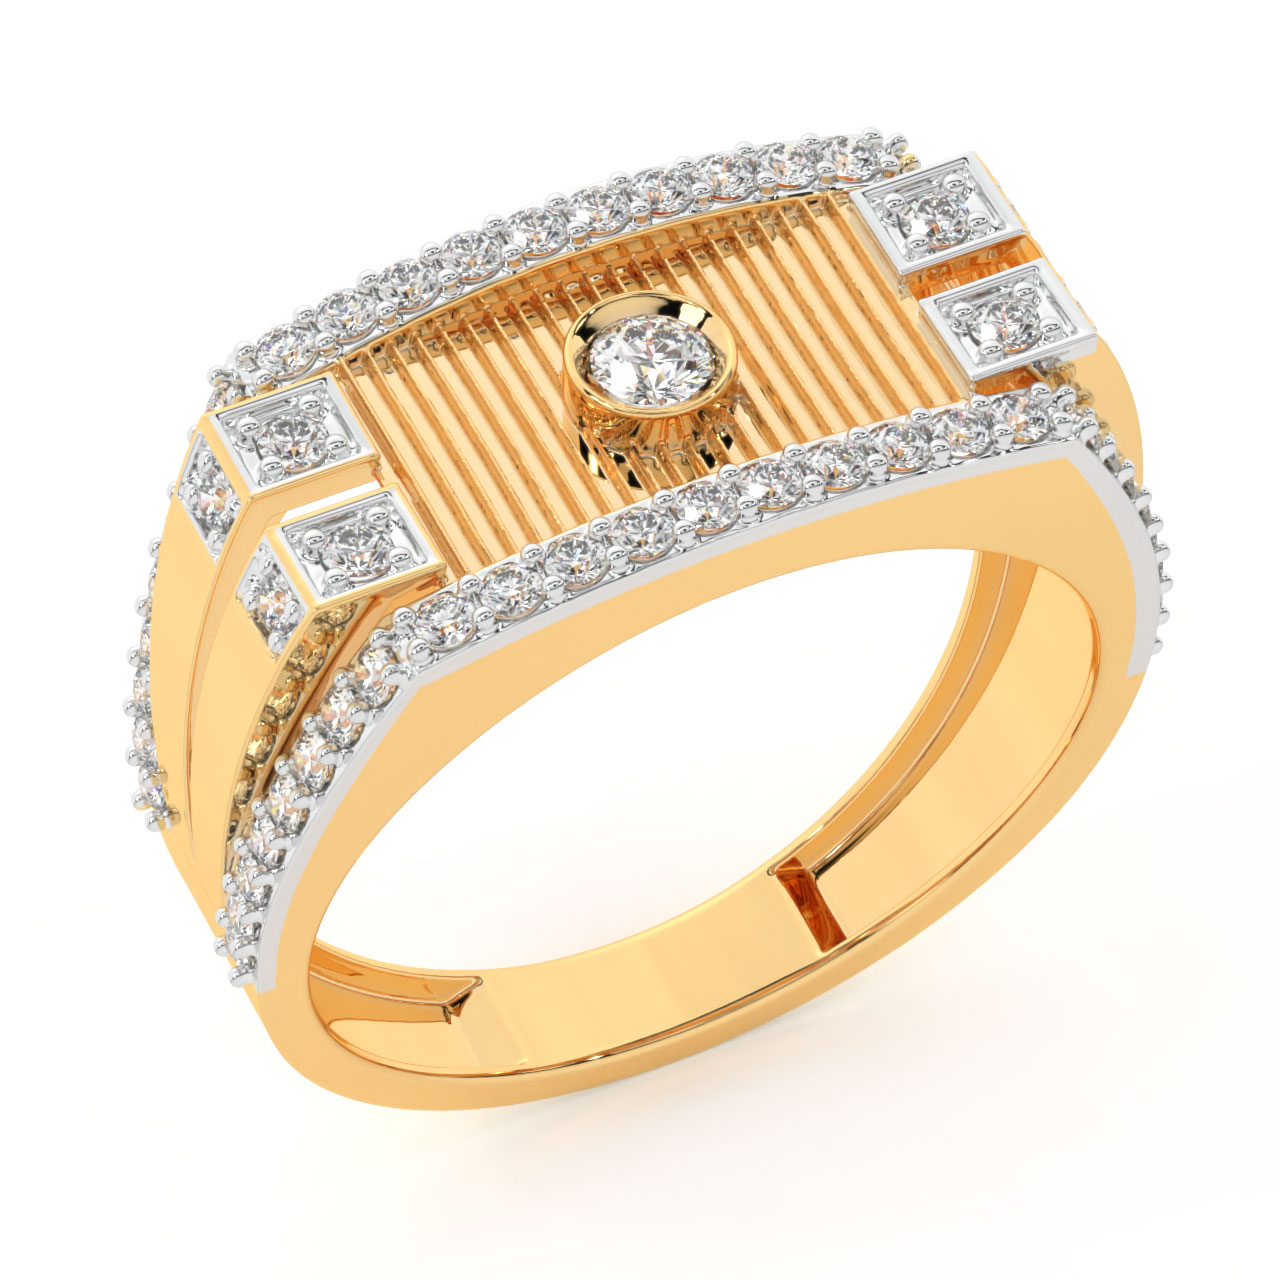 Buy Spangel Fashion Men's Finger Ring Brass With Diamond Stylish Design  Gold Plated Brass (17) at Amazon.in